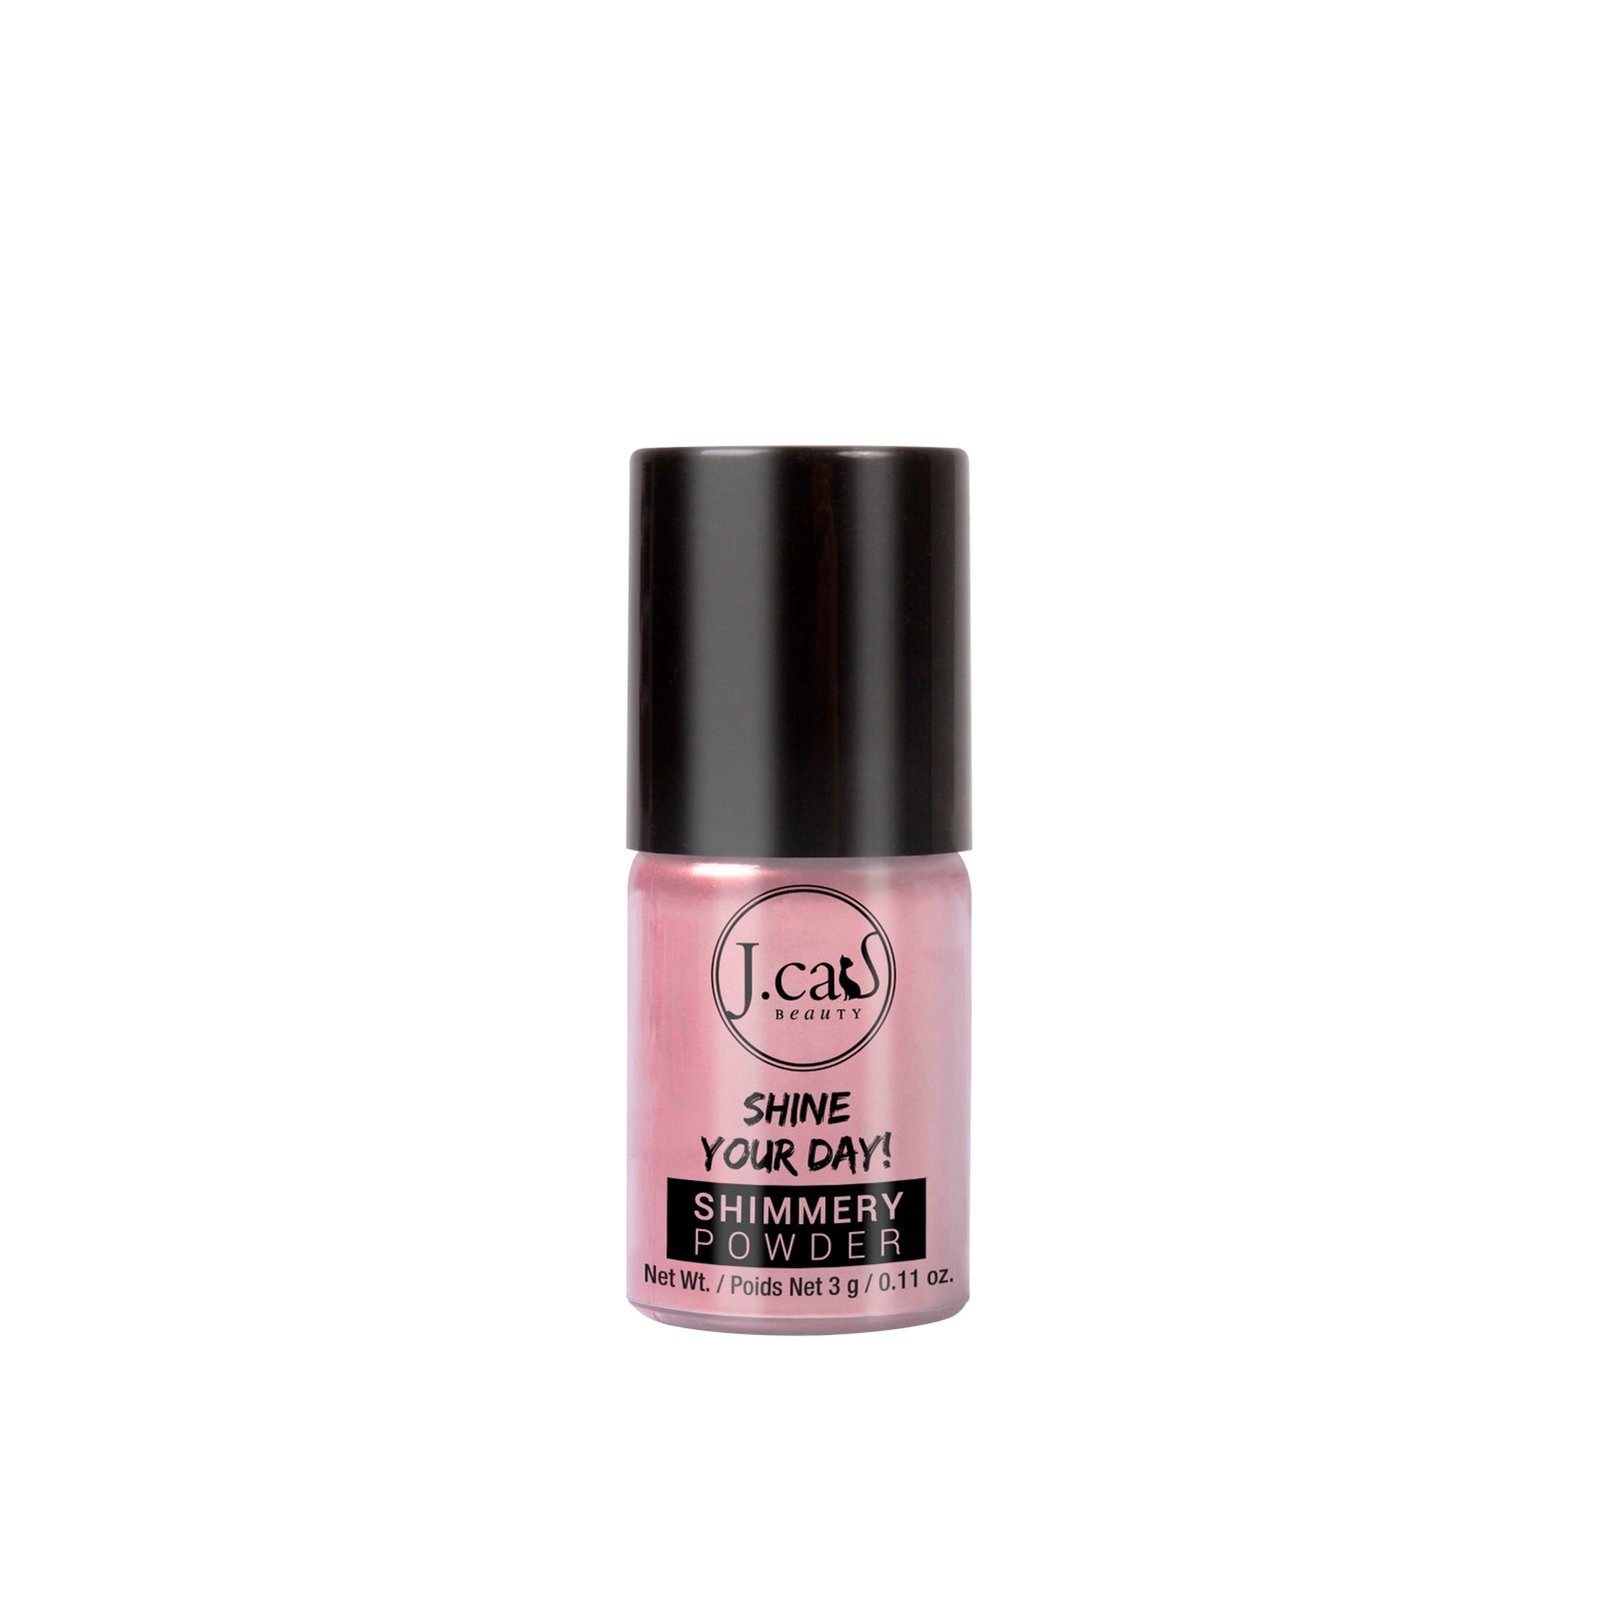 J.Cat Shine Your Day! Shimmery Powder 133 Lavender Pink 3g